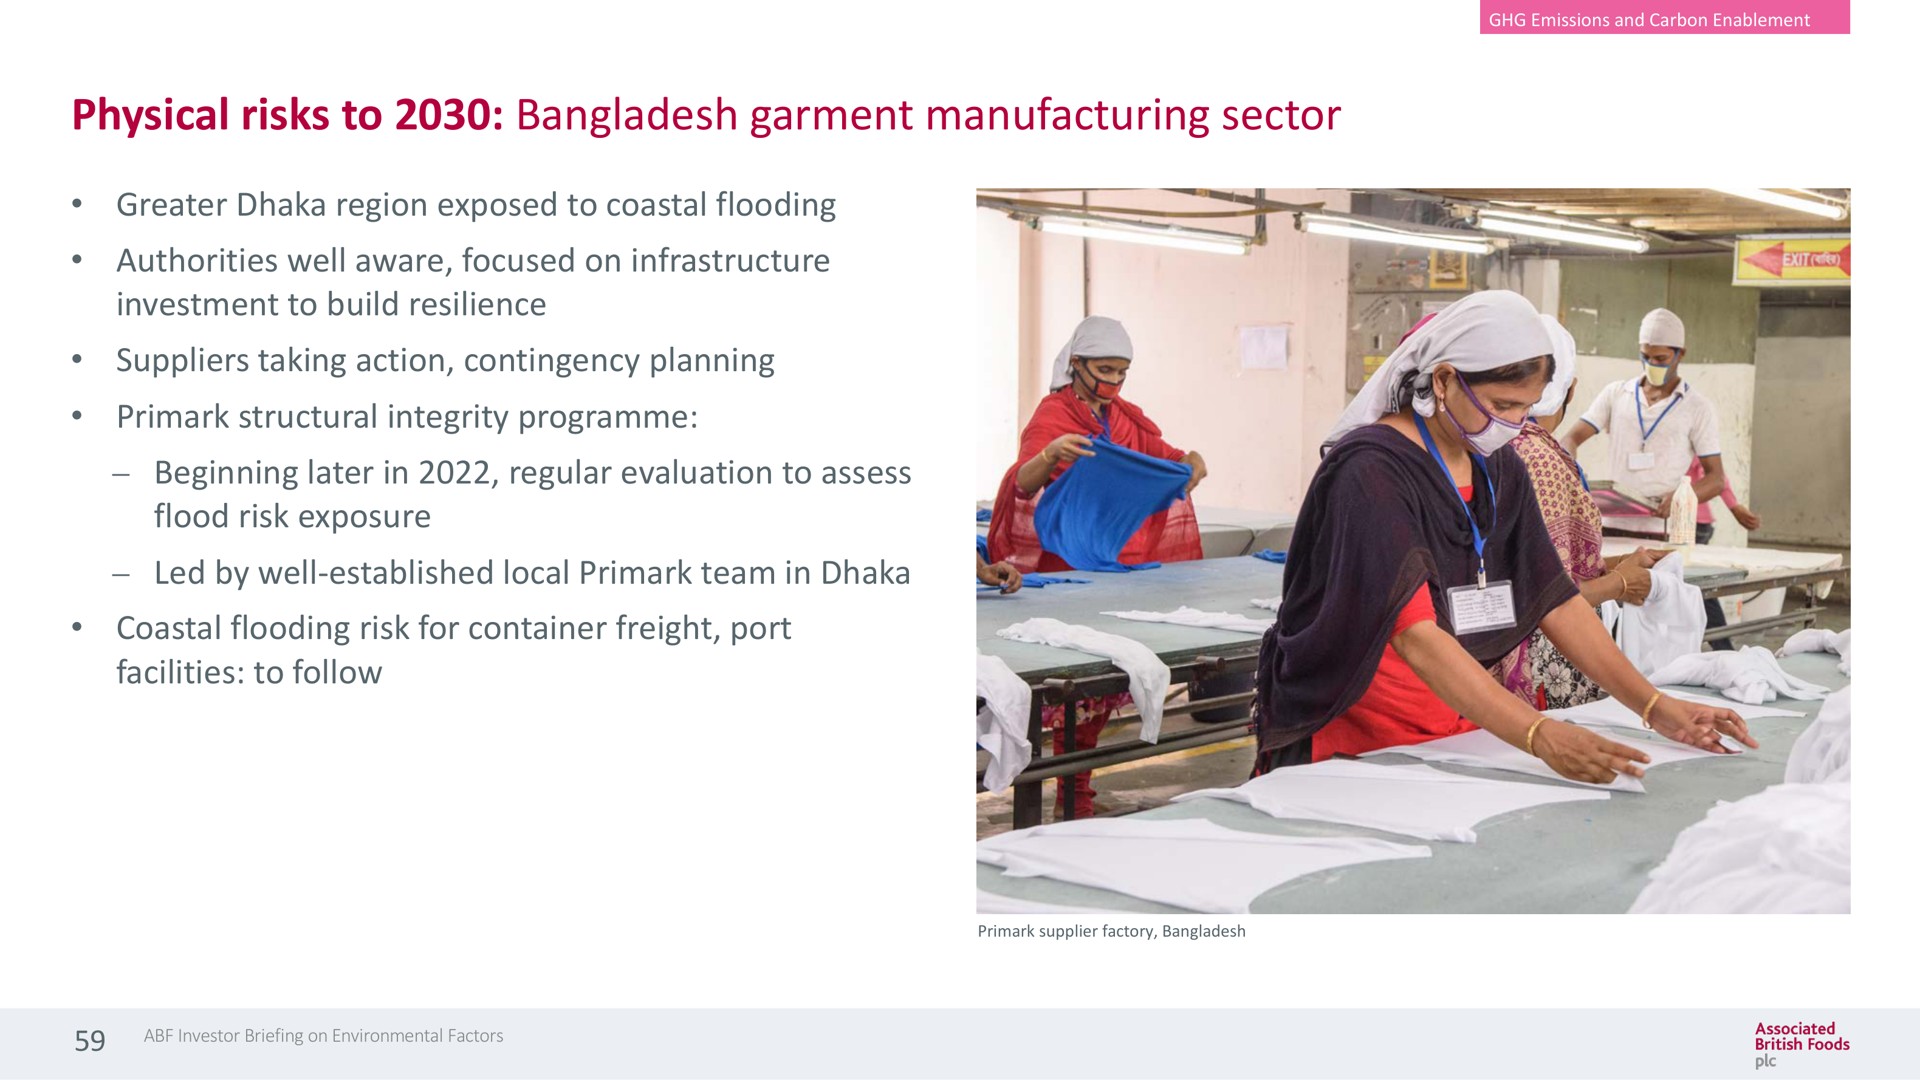 physical risks to garment manufacturing sector greater region exposed to coastal flooding authorities well aware focused on infrastructure investment to build resilience suppliers taking action contingency planning structural integrity beginning later in regular evaluation to assess flood risk exposure led by well established local team in coastal flooding risk for container freight port facilities to follow | Associated British Foods